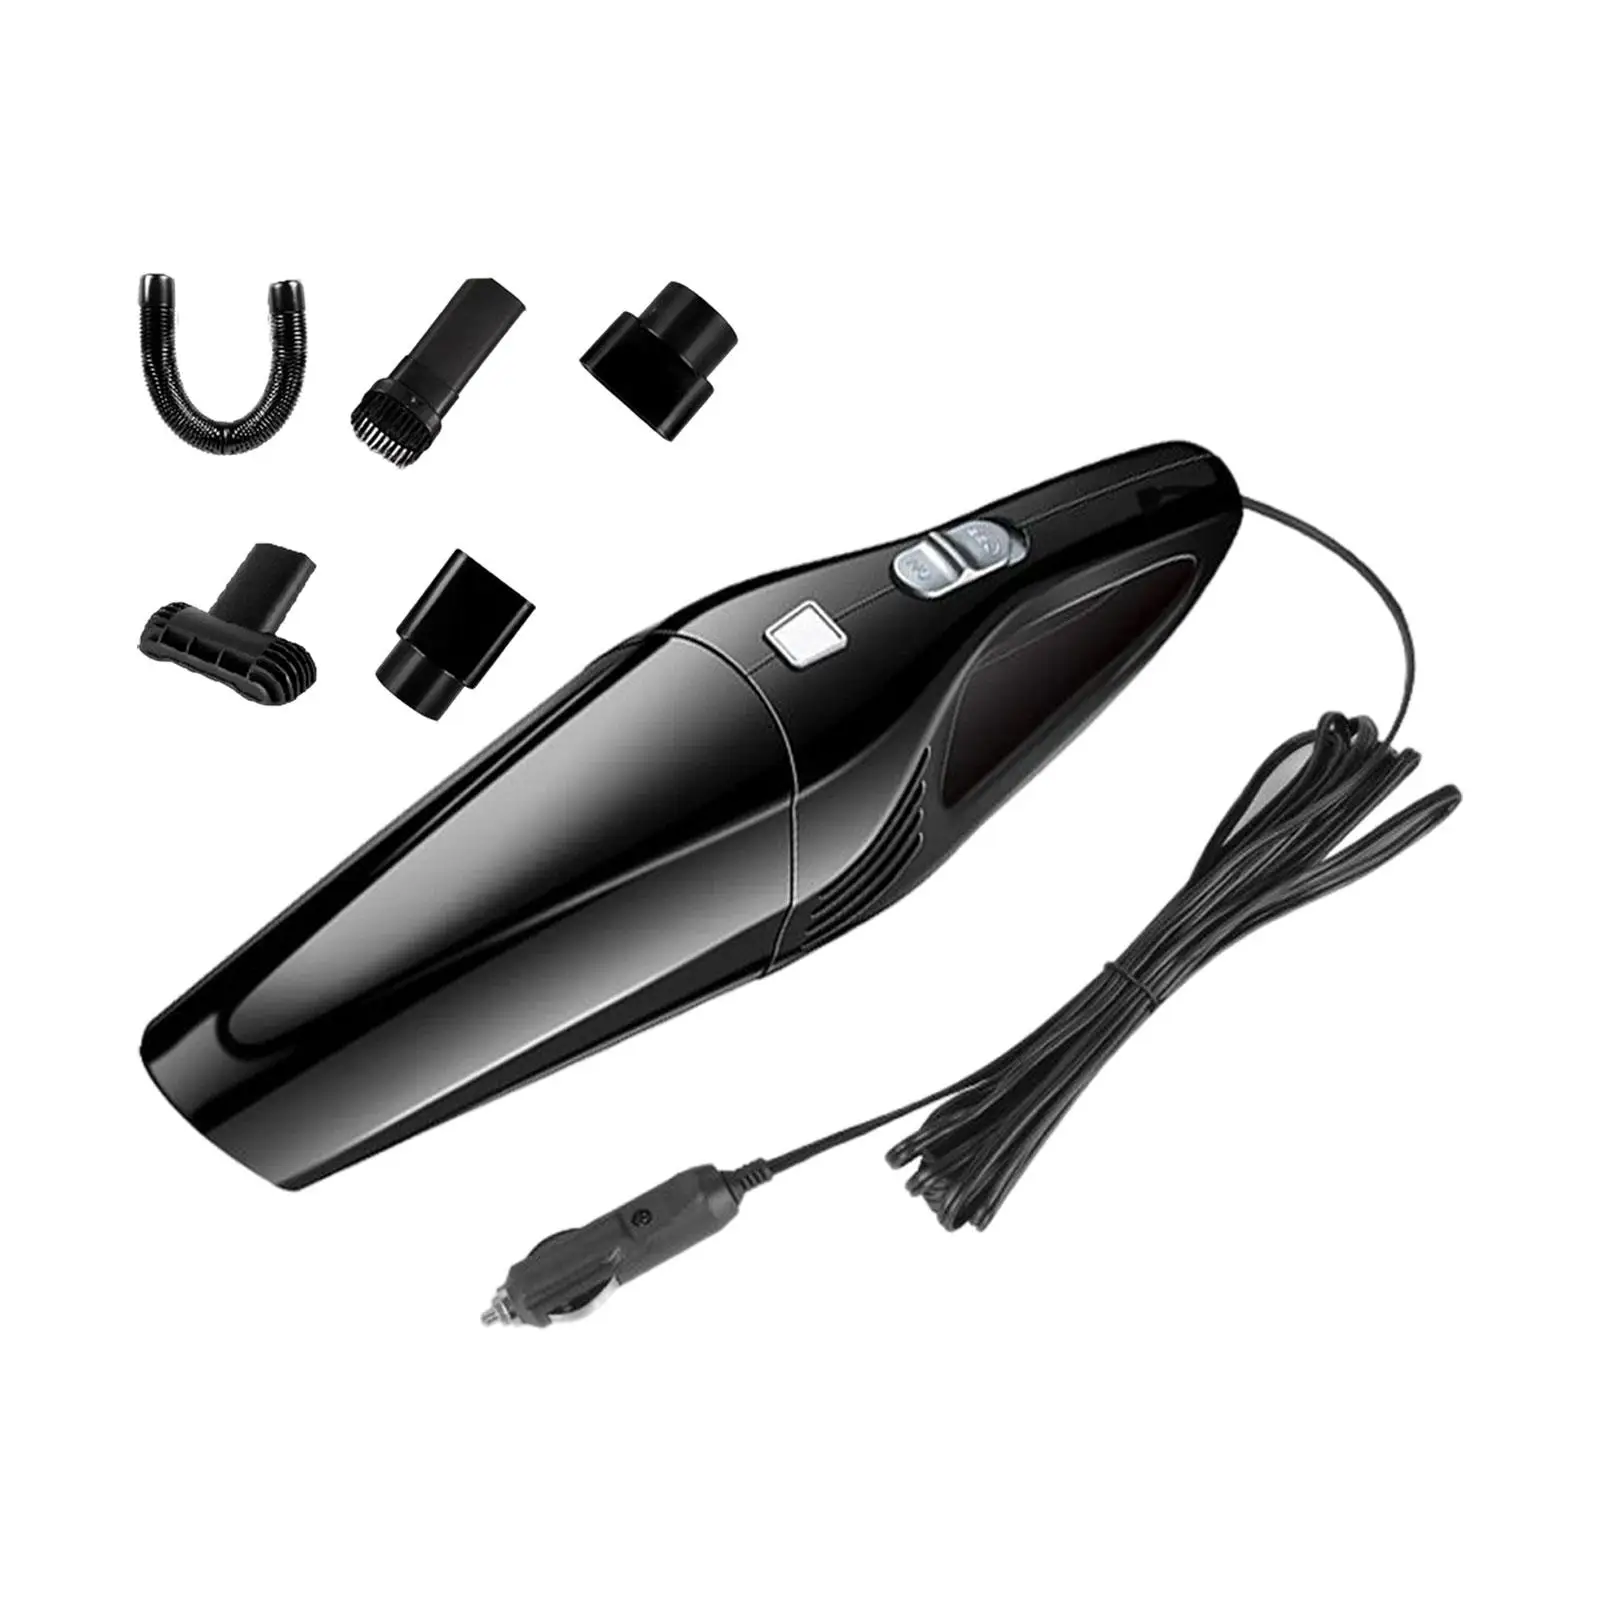 Handheld Car Vacuum Cleaner 120W 12V Powerful Handheld Vacuum Wet and Dry Using for Office Pet Hair Car Interior Kitchen Home